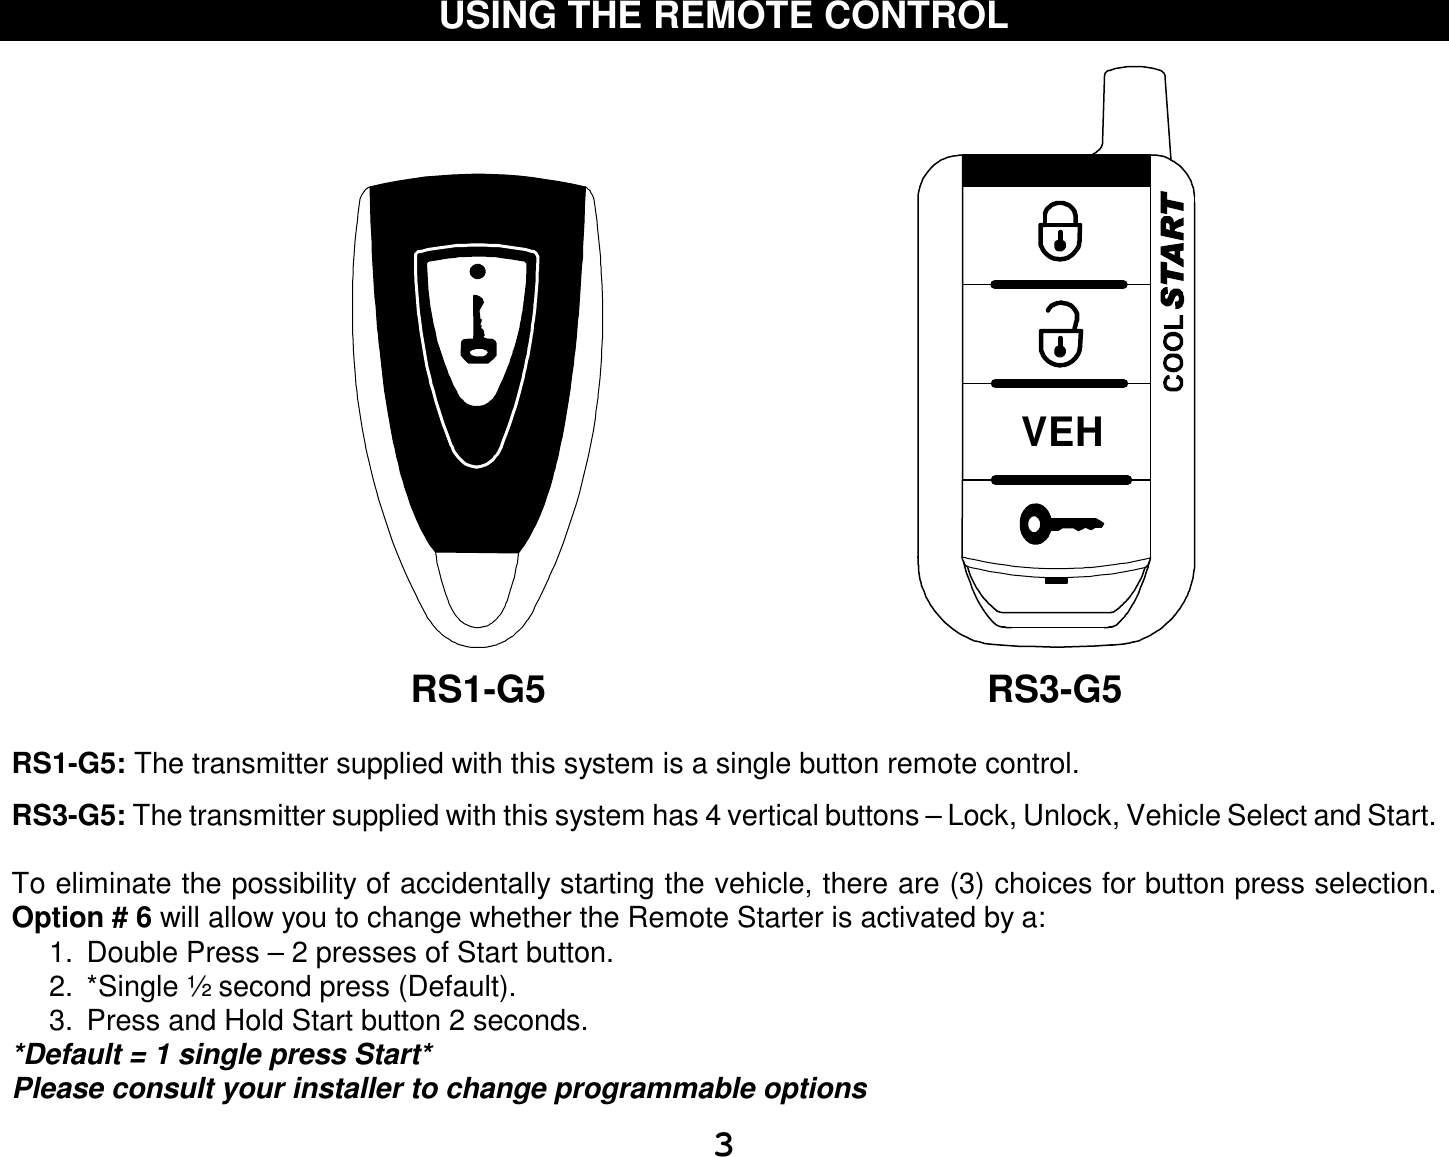  3 USING THE REMOTE CONTROL                                                                                                          RS1-G5                                          RS3-G5  RS1-G5: The transmitter supplied with this system is a single button remote control.  RS3-G5: The transmitter supplied with this system has 4 vertical buttons – Lock, Unlock, Vehicle Select and Start.  To eliminate the possibility of accidentally starting the vehicle, there are (3) choices for button press selection. Option # 6 will allow you to change whether the Remote Starter is activated by a: 1. Double Press – 2 presses of Start button. 2. *Single ½ second press (Default). 3. Press and Hold Start button 2 seconds. *Default = 1 single press Start* Please consult your installer to change programmable options VEH  